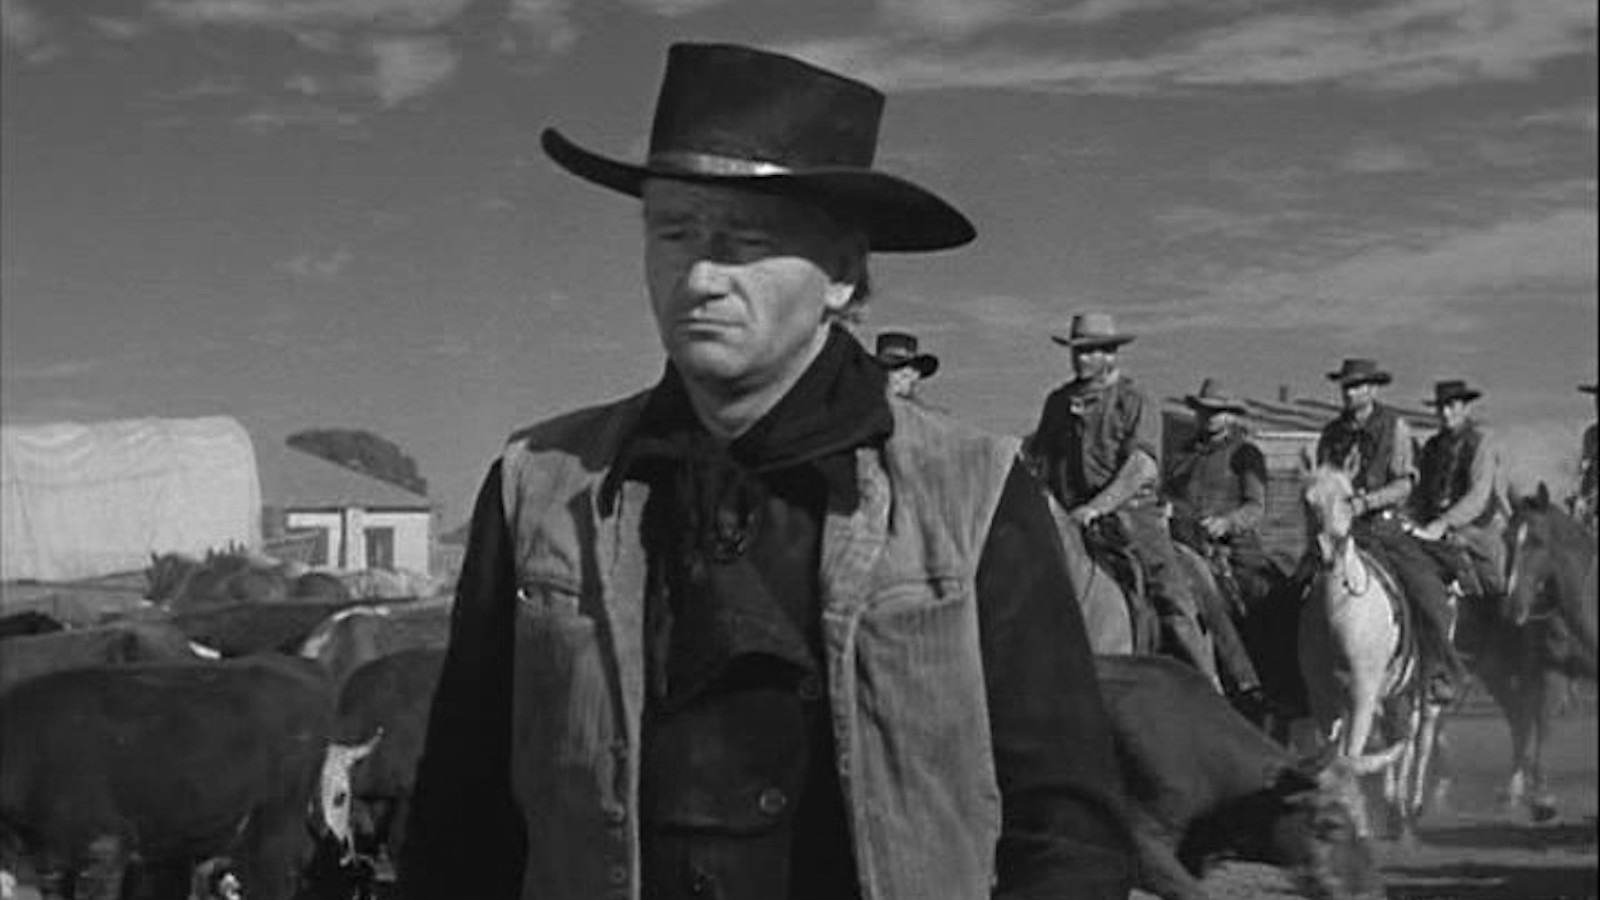 Wayne And Howard Hawks Didn't See Eye To Eye Over How To Approach His Red River Role